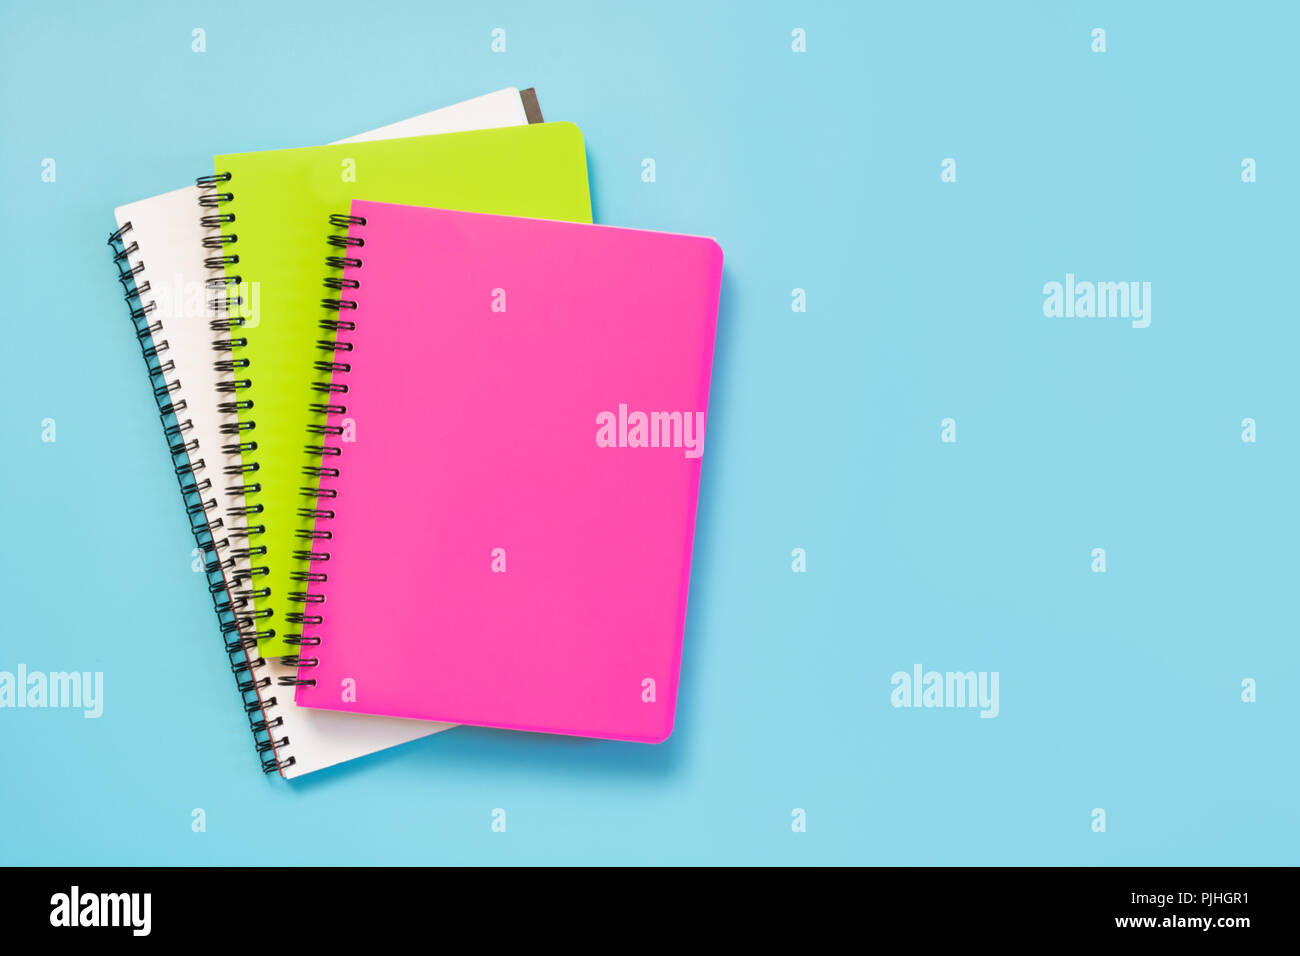 Colorful girlish school supplies, notebooks and pens on punchy blue. Top view, flat lay. Copy space. Stock Photo